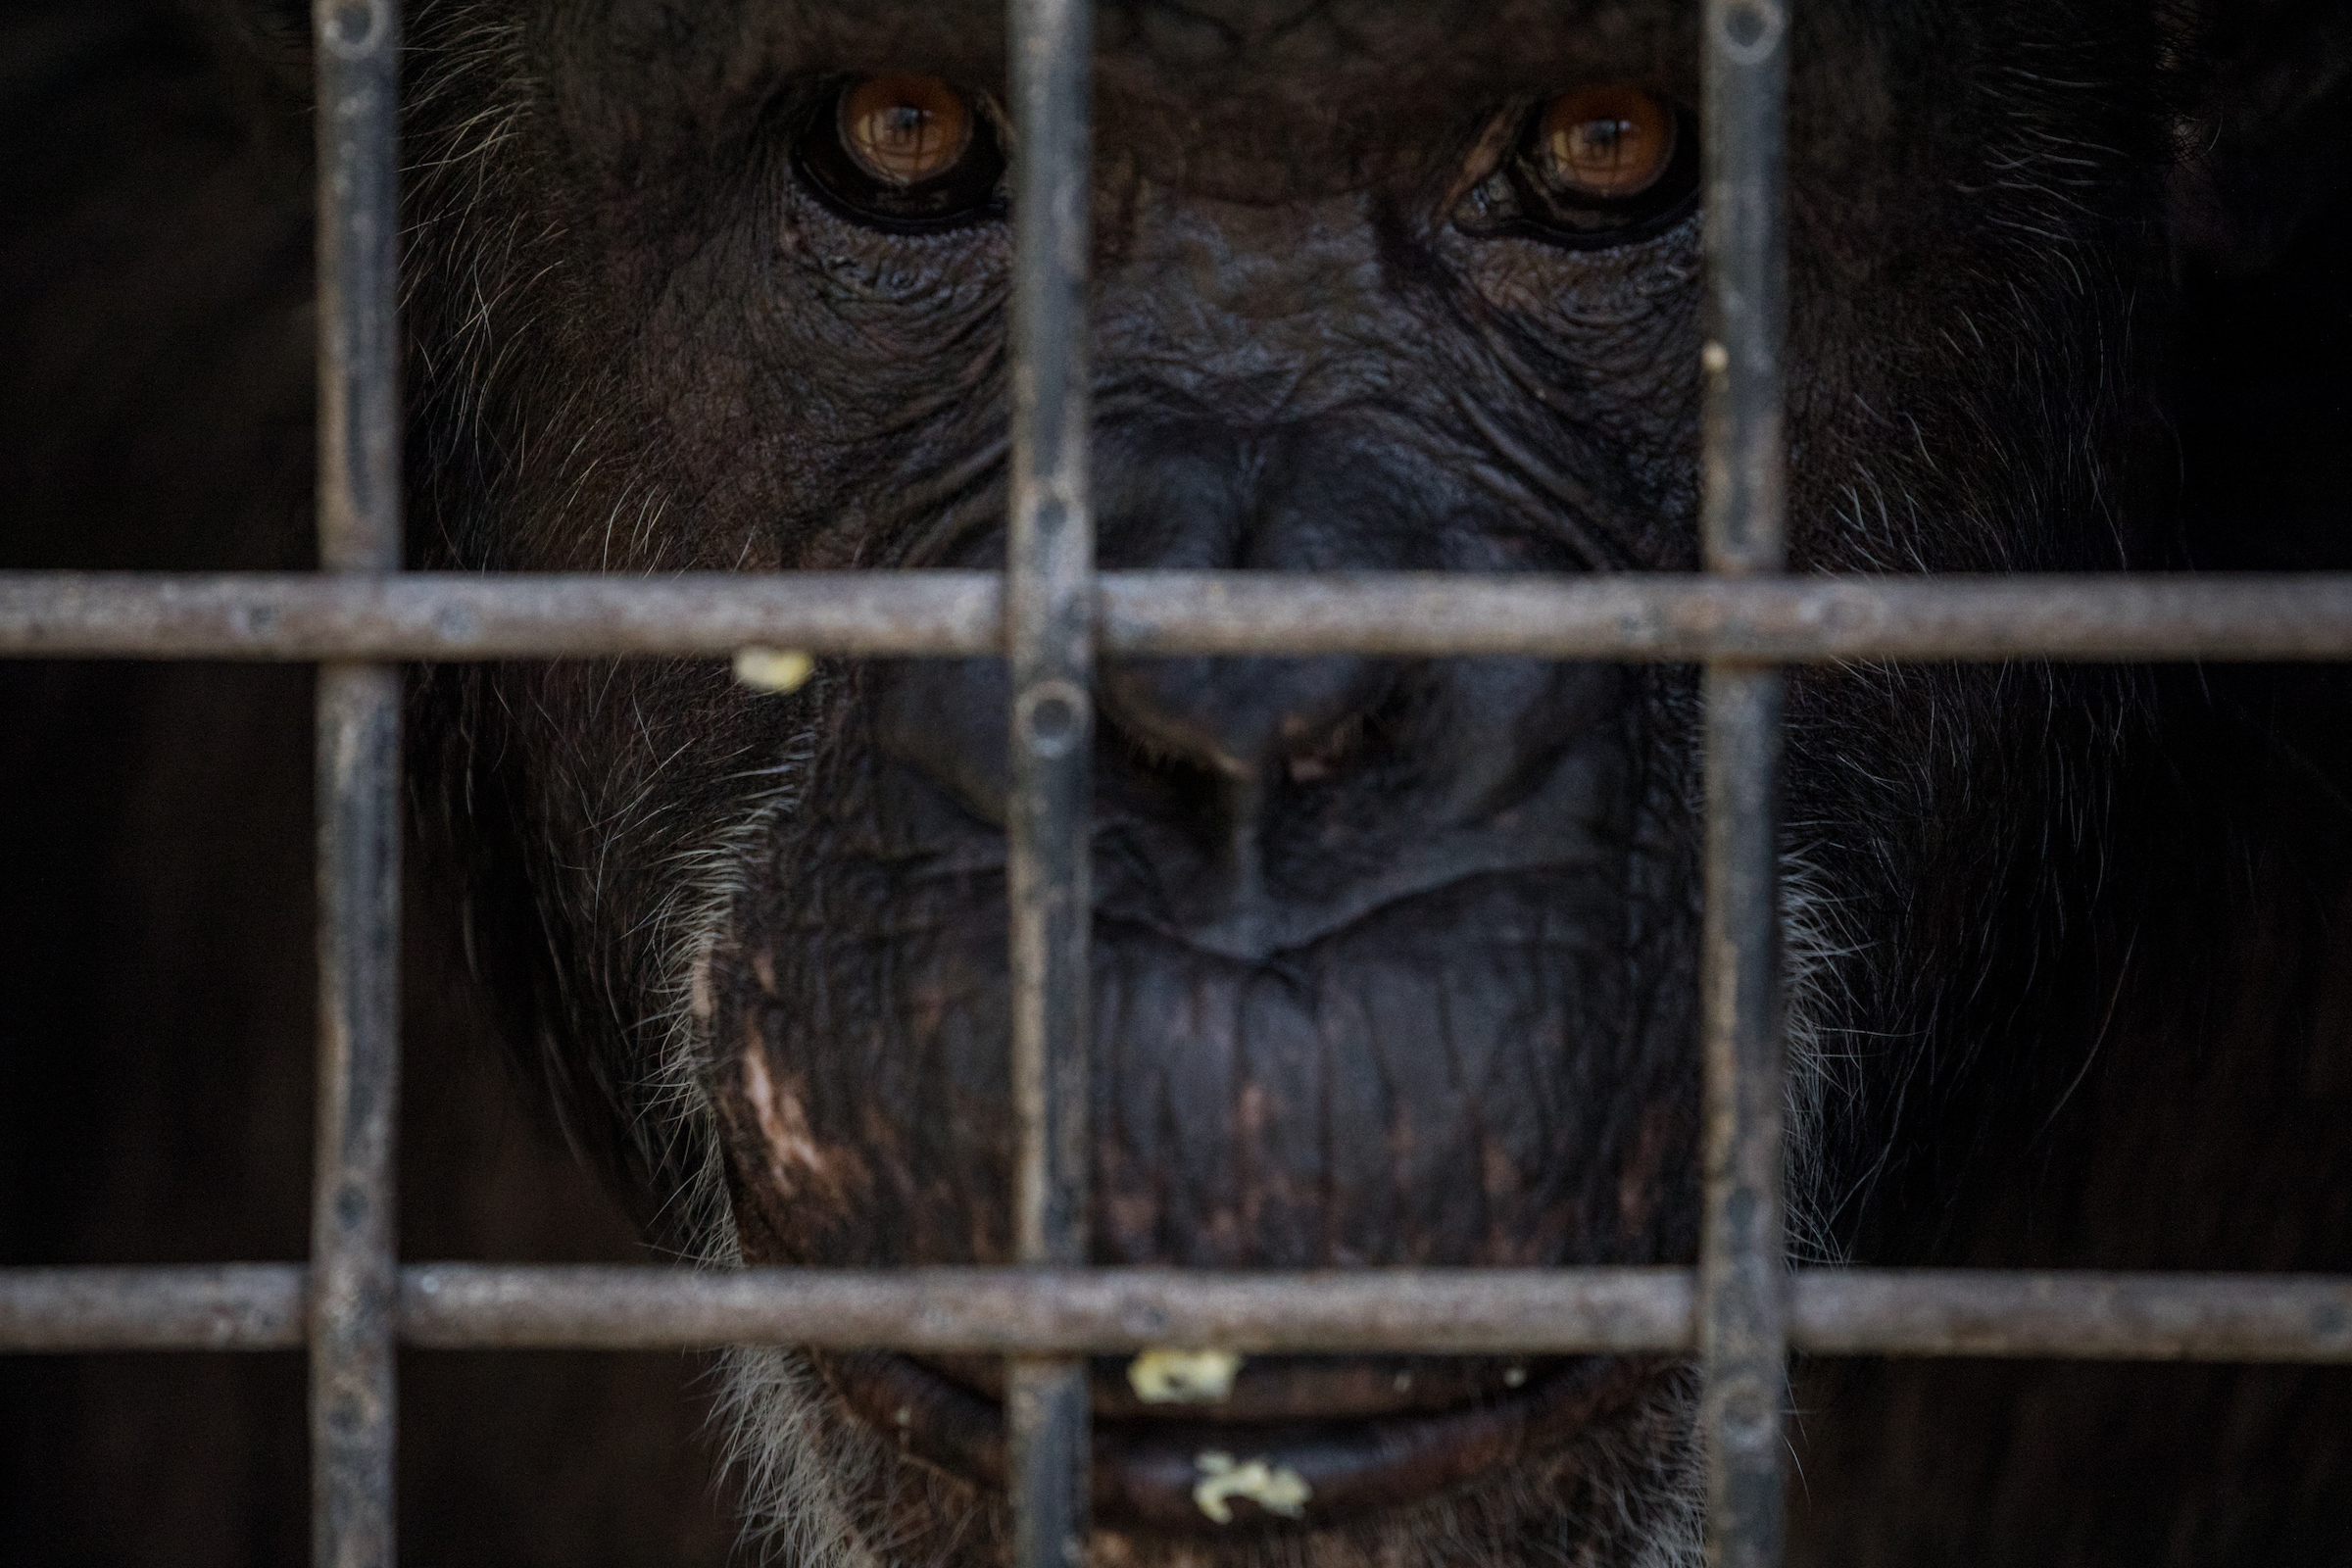 A close-up of a chimp peeking through the fence at the sanctuary.